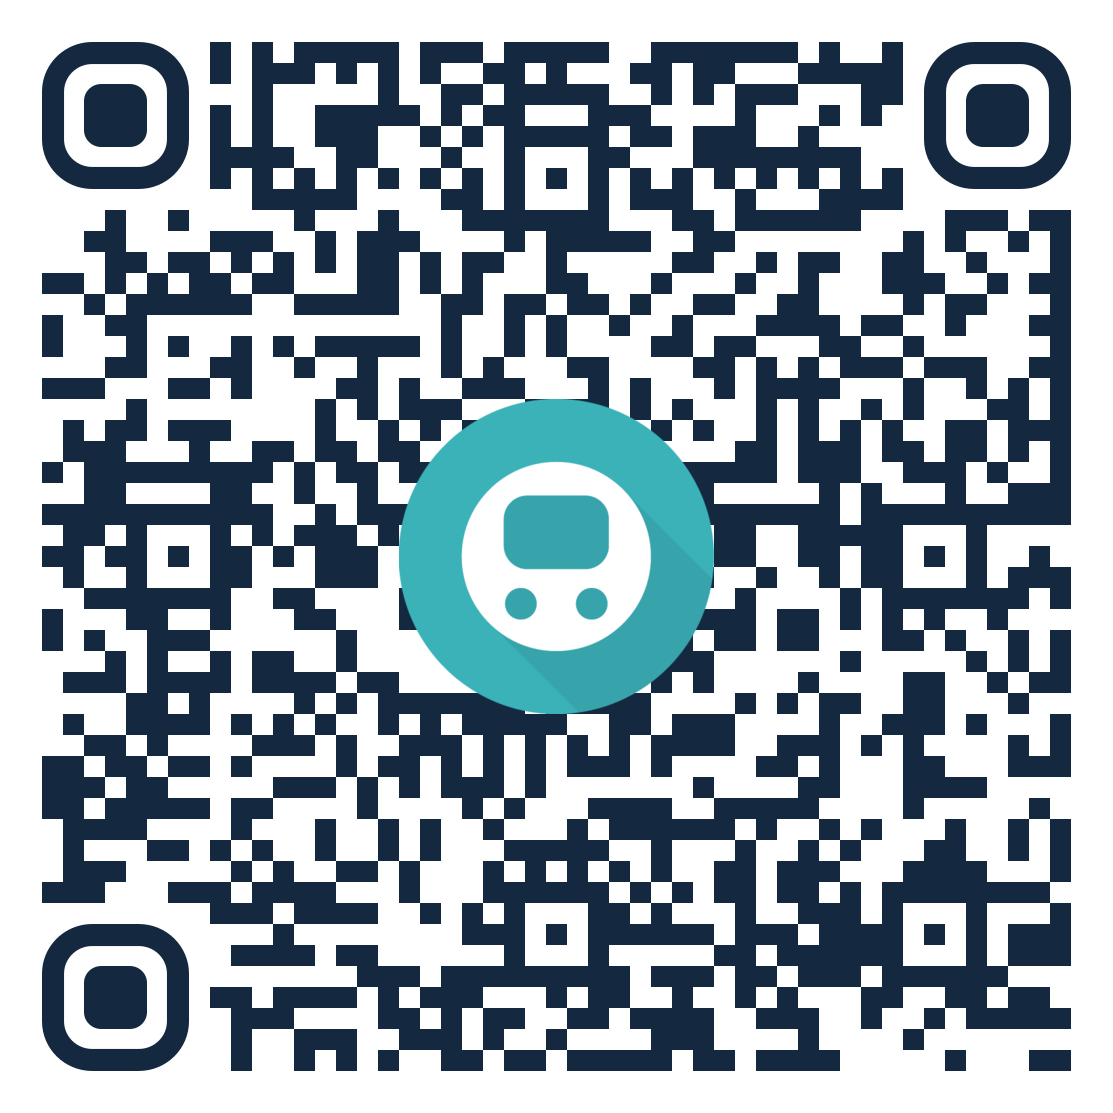 qrcode play store